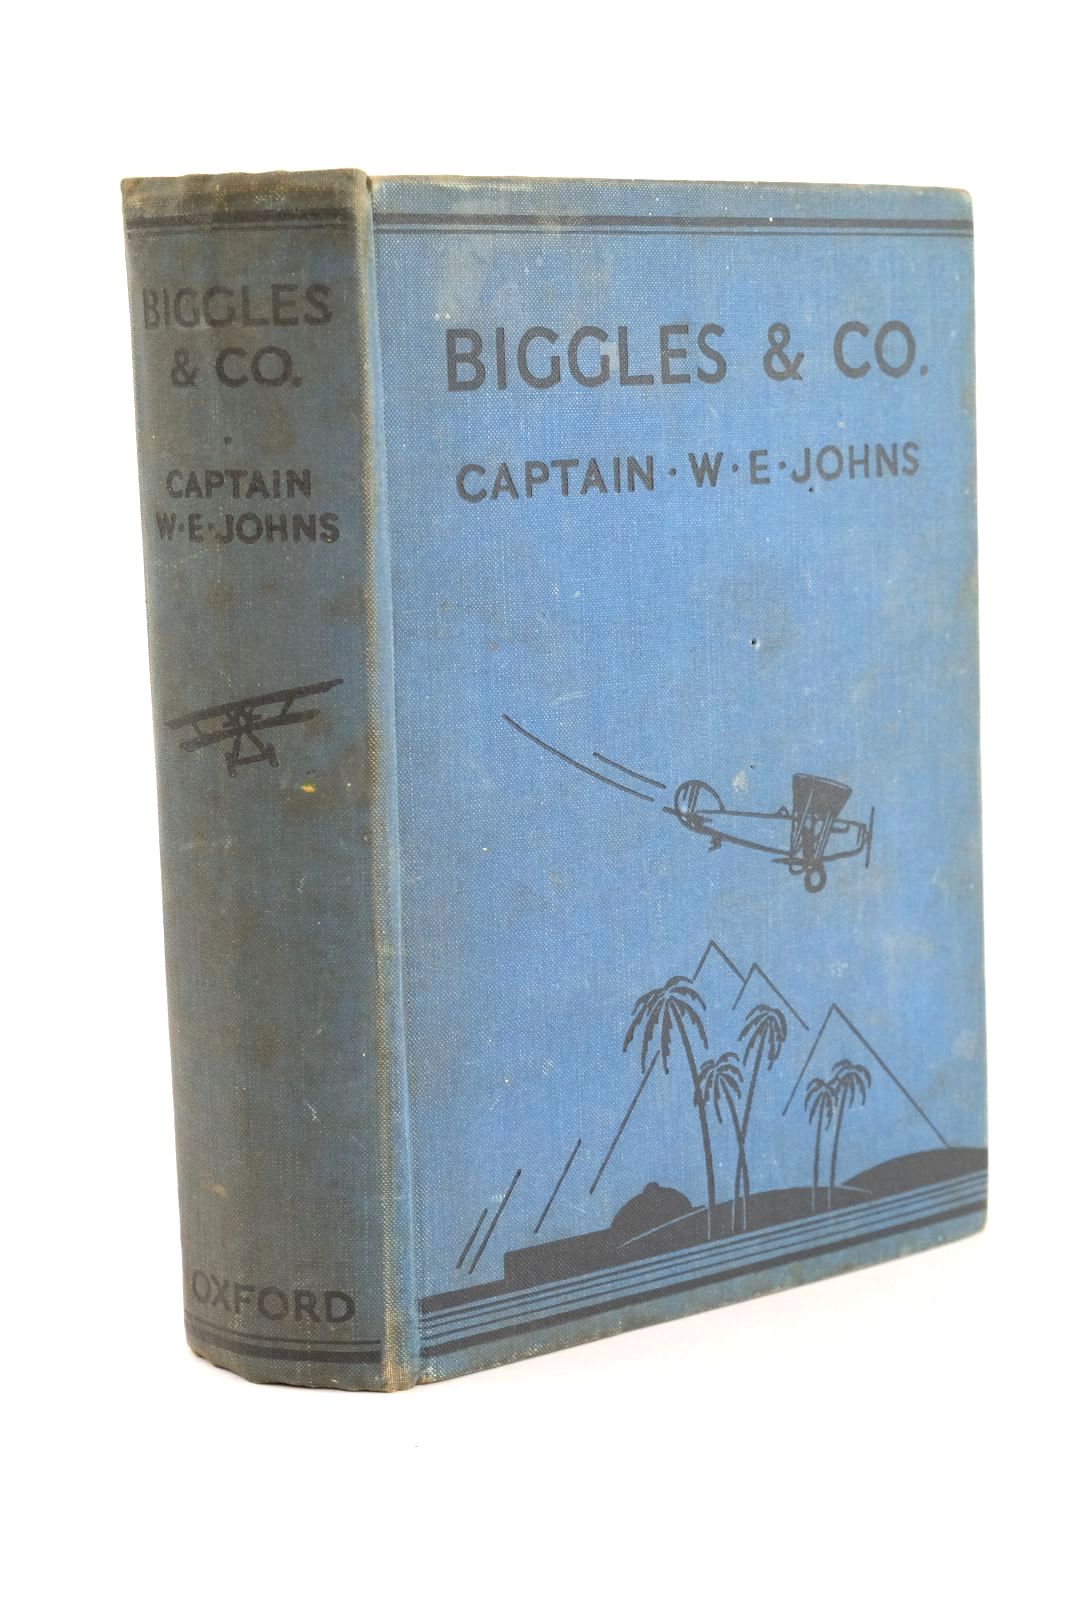 Photo of BIGGLES & CO. written by Johns, W.E. illustrated by Leigh, Howard Sindall, Alfred published by Oxford University Press, Humphrey Milford (STOCK CODE: 1323847)  for sale by Stella & Rose's Books